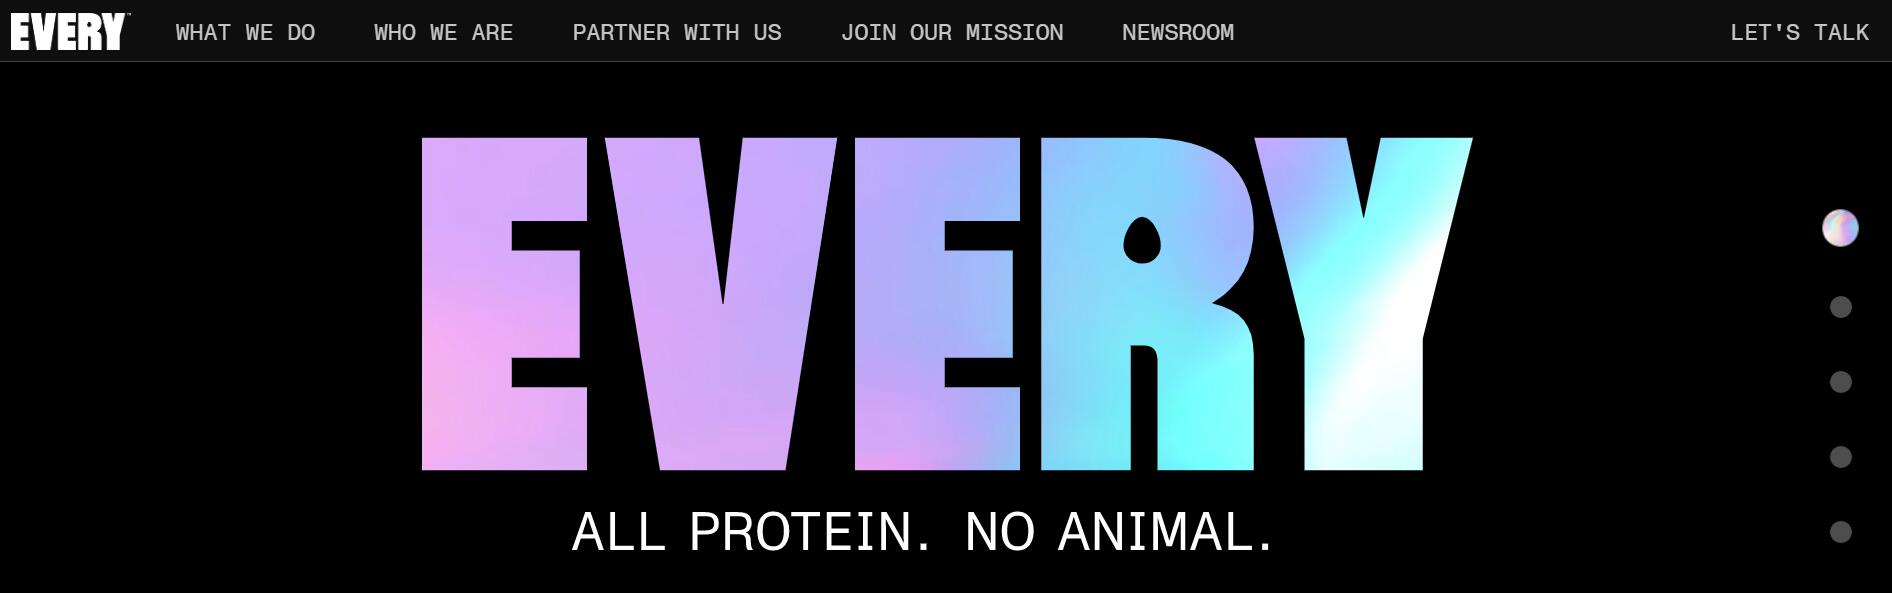 Anne Hathaway Makes First B2B Investment in The EVERY Co., Backing the Future for Animal-Free Protein Food